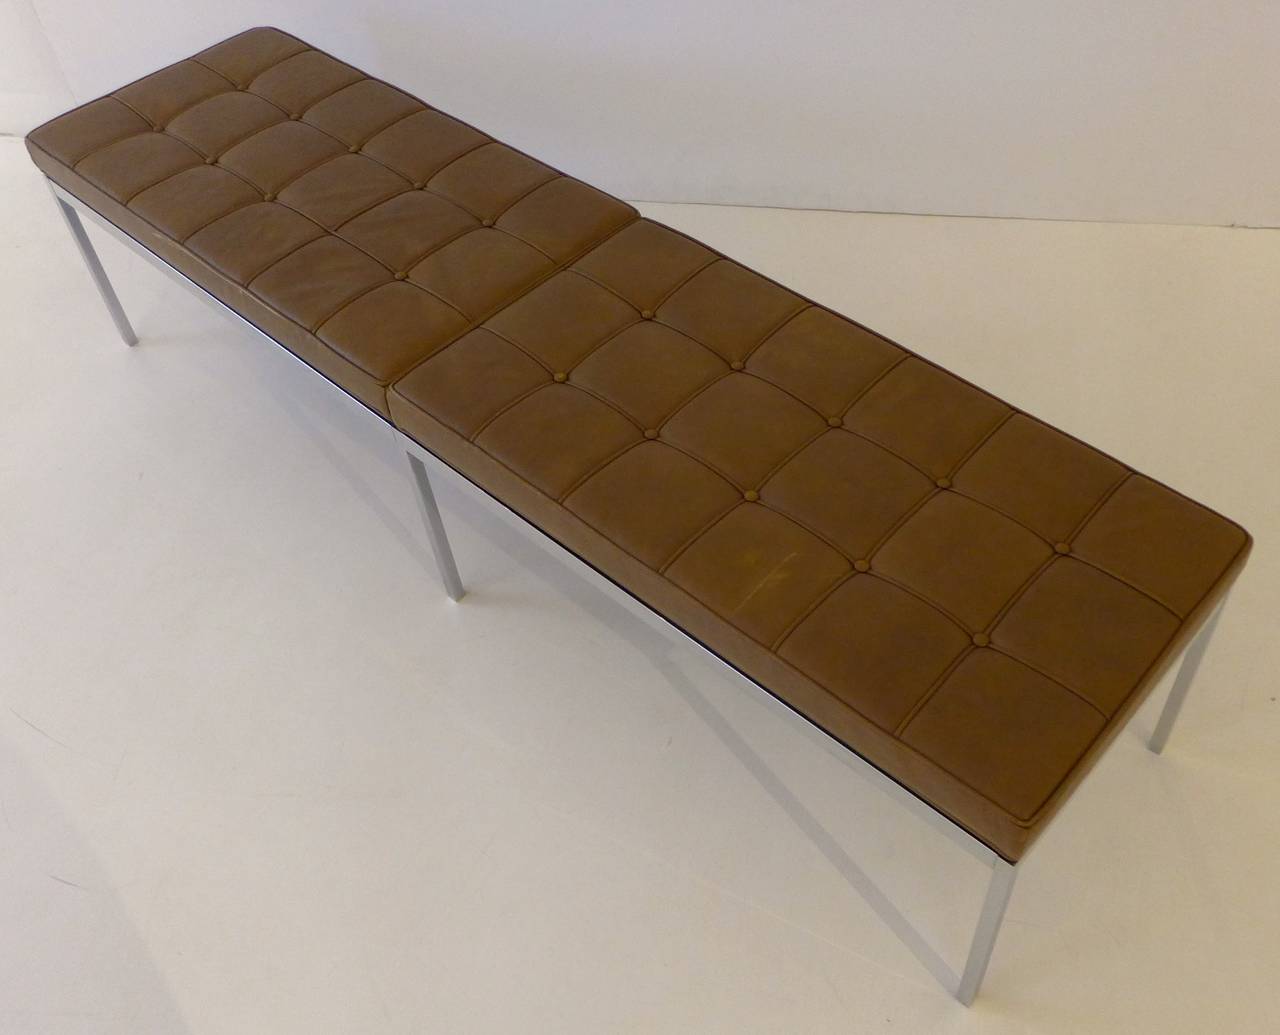 Six foot long bench of chrome-plated steel and leather, designed by Florence Knoll and produced by Knoll, circa 1970. Upholstered in individual welted panels with button tufting. In fine vintage condition, with some minor wear and scuffing to the